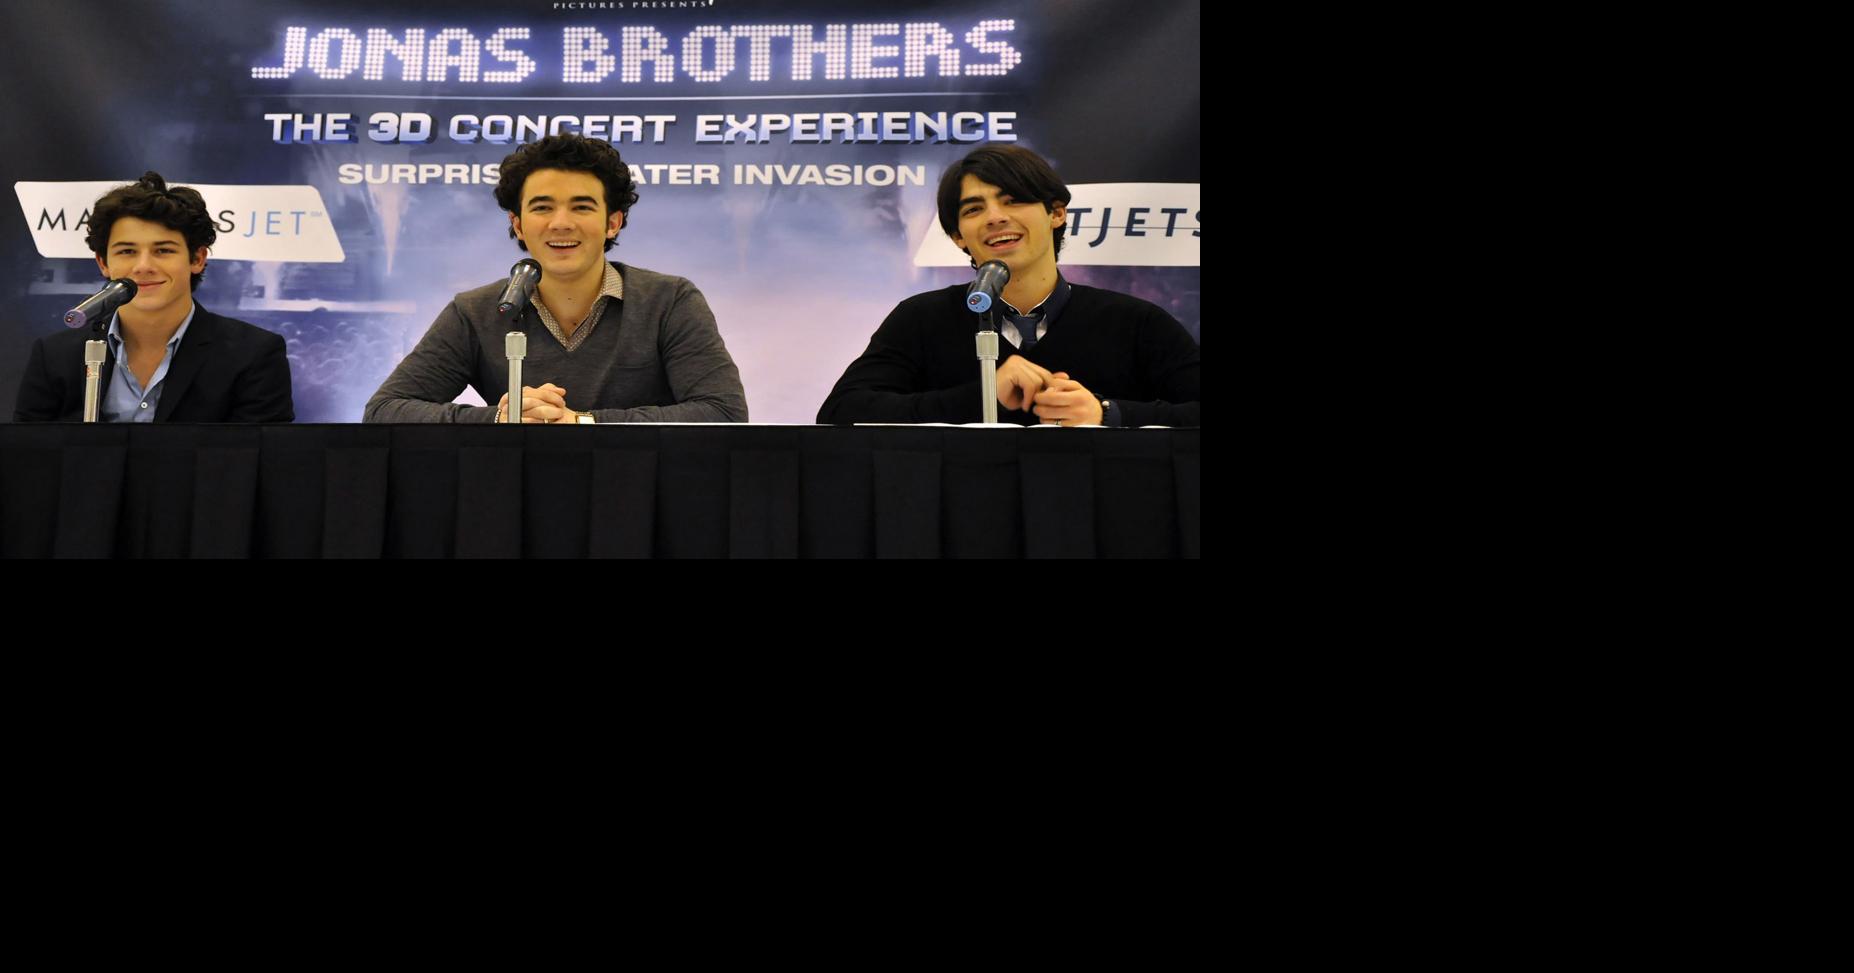 Jonas Brothers to reunite, release documentary and new music: report